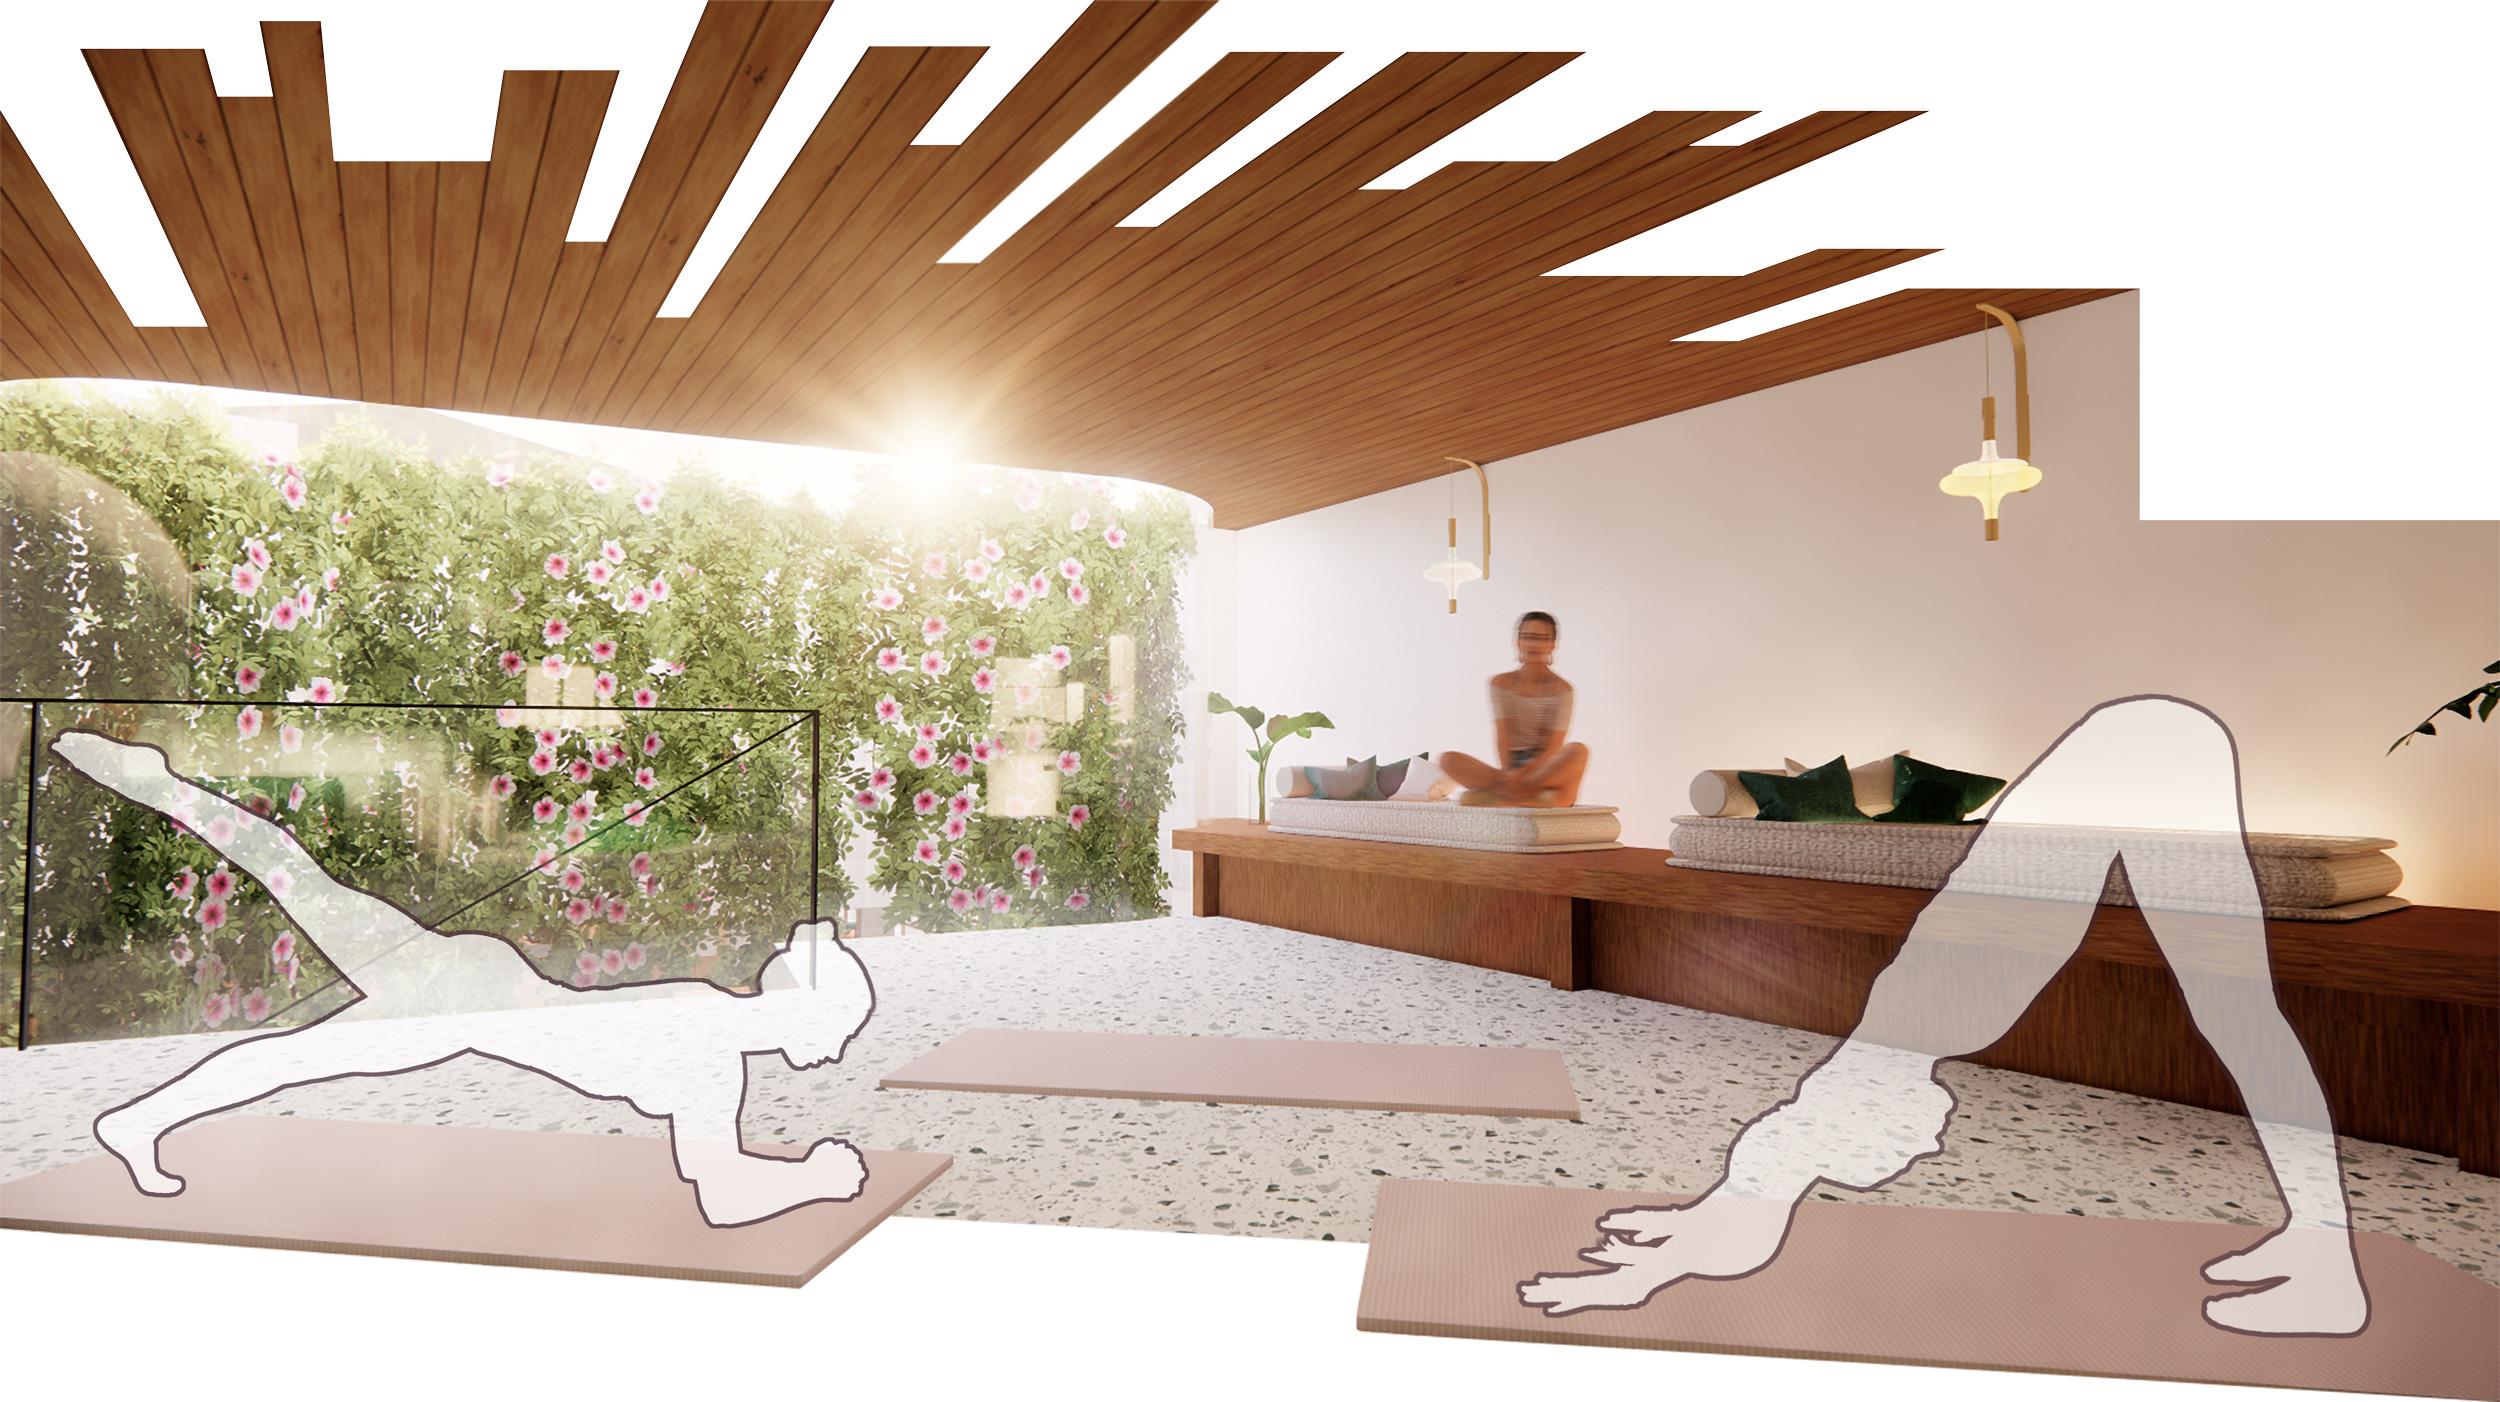 Rendered image depicting figures in various yoga poses and a woman sat cross-legged on a sofa in the background, next to a glass atrium filled with hanging plants.